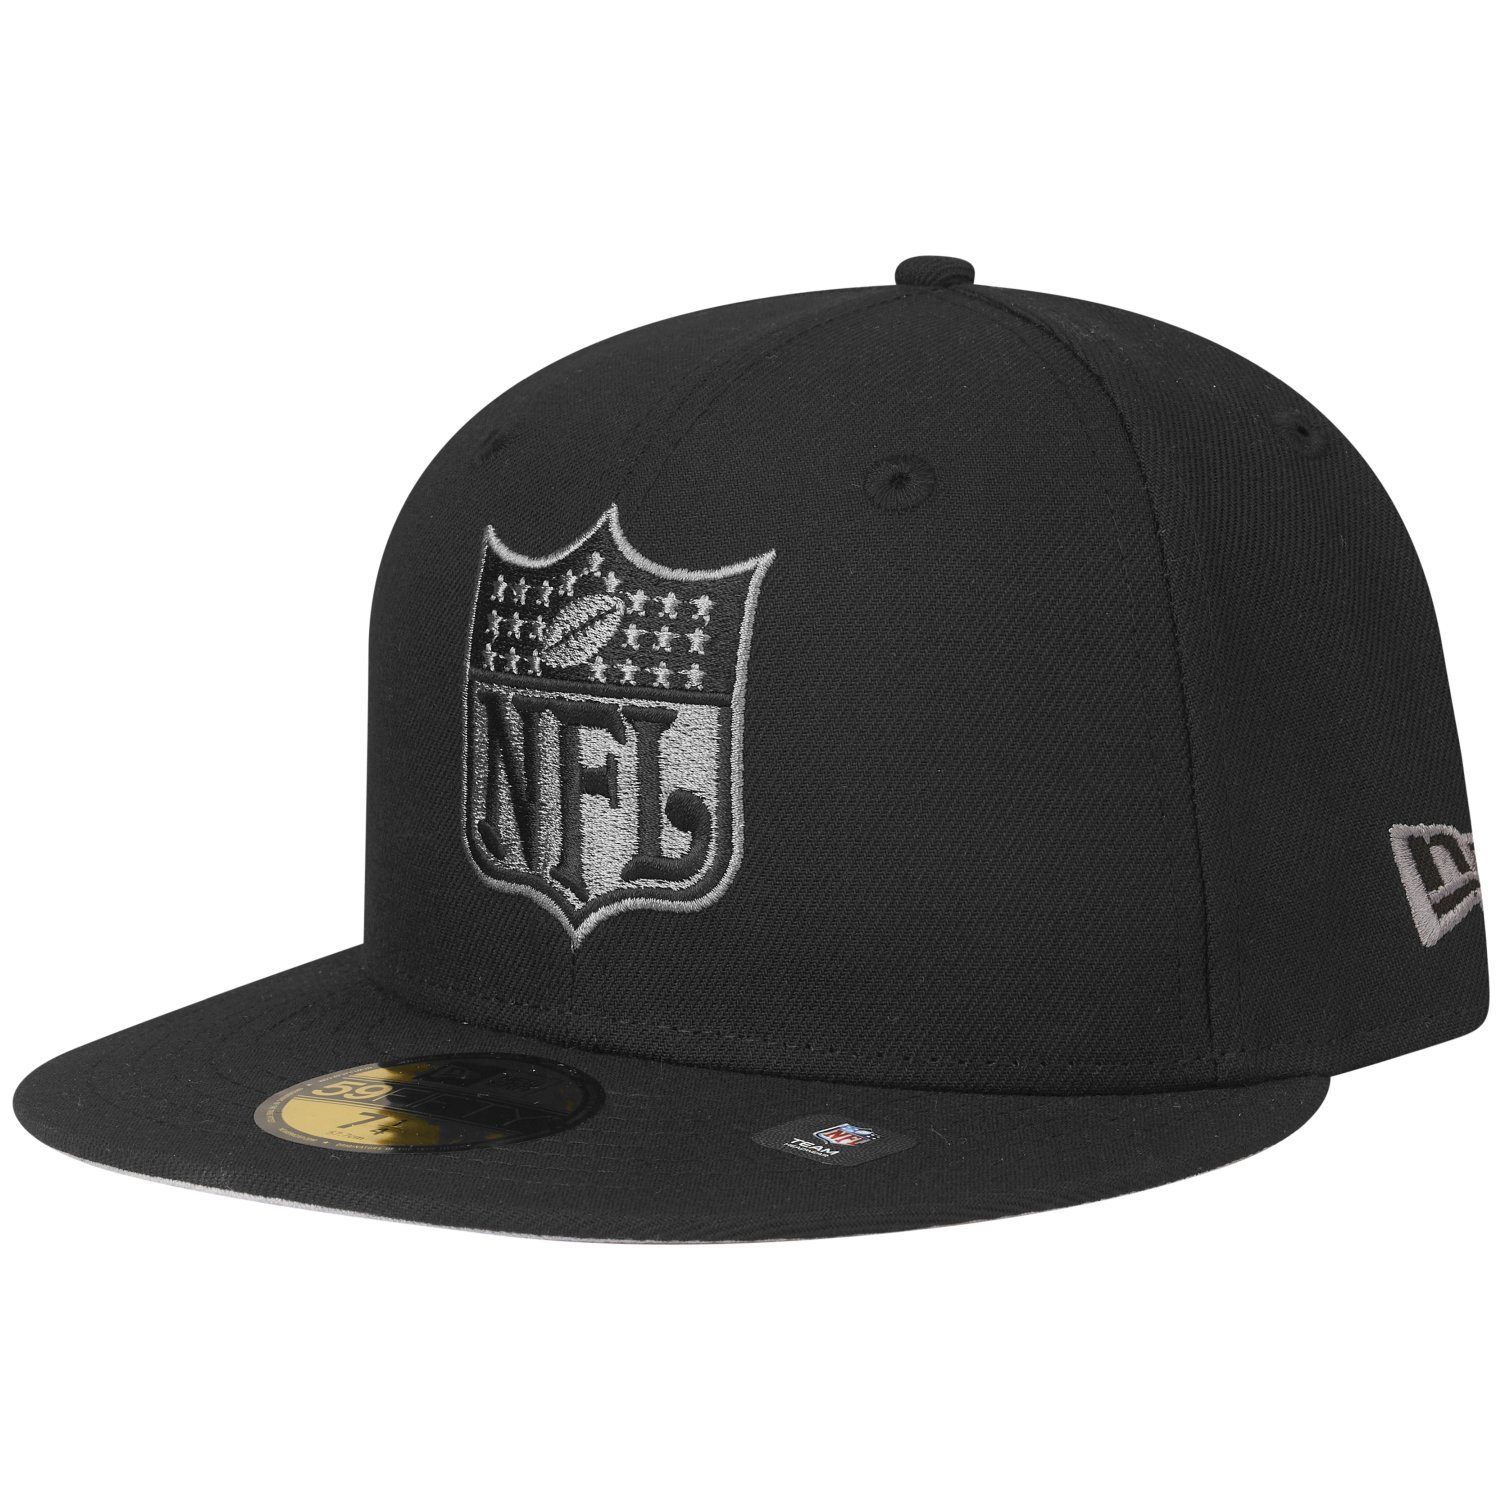 NFL Cap New 59Fifty Era Fitted TEAMS NFL SHIELD